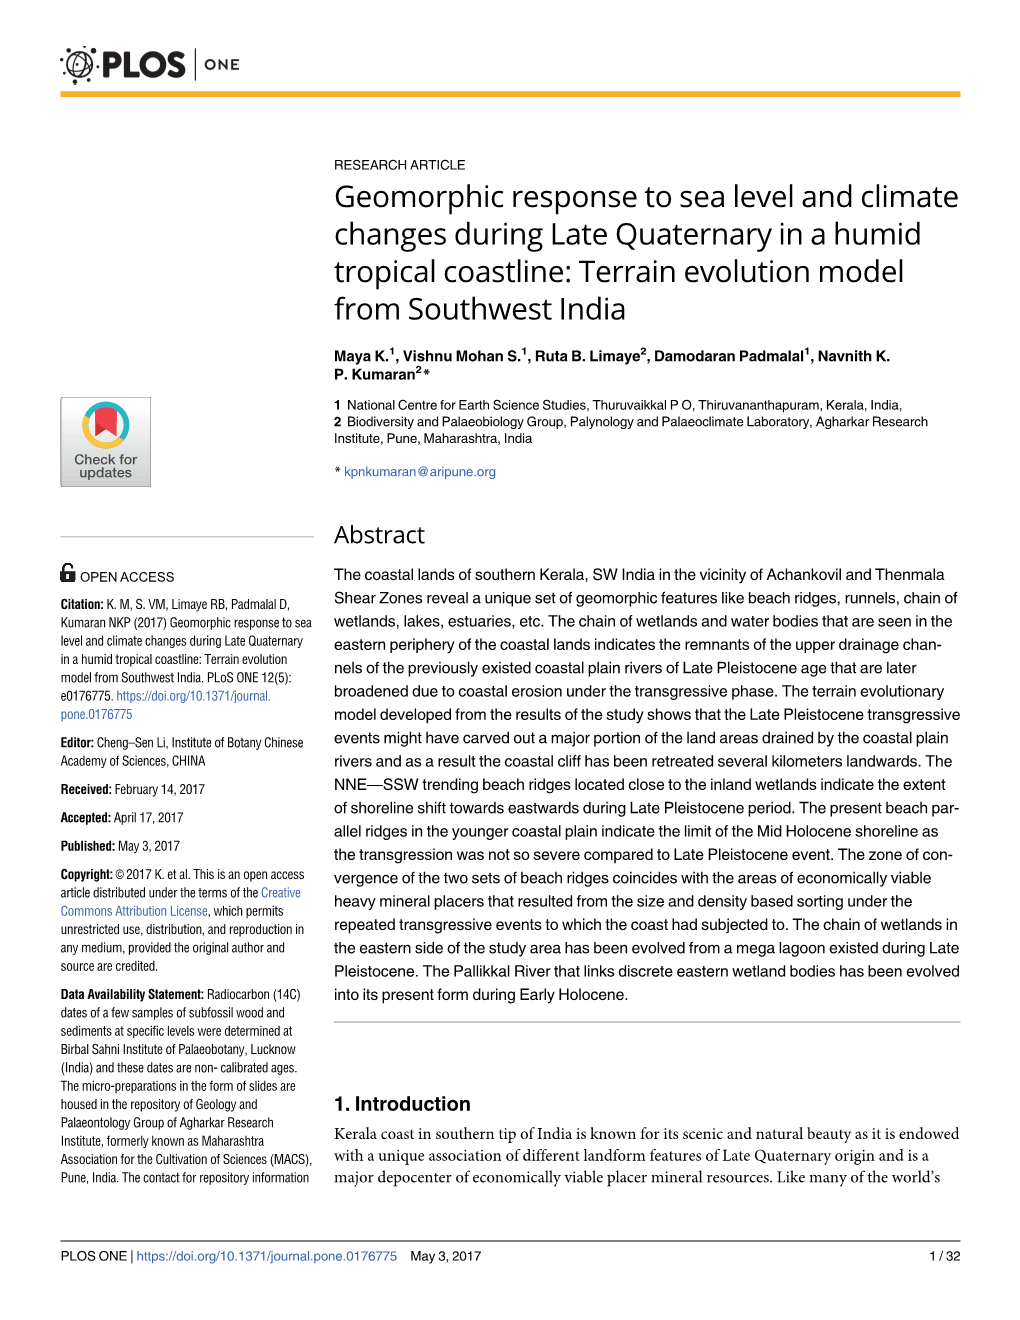 Geomorphic Response to Sea Level and Climate Changes During Late Quaternary in a Humid Tropical Coastline: Terrain Evolution Model from Southwest India